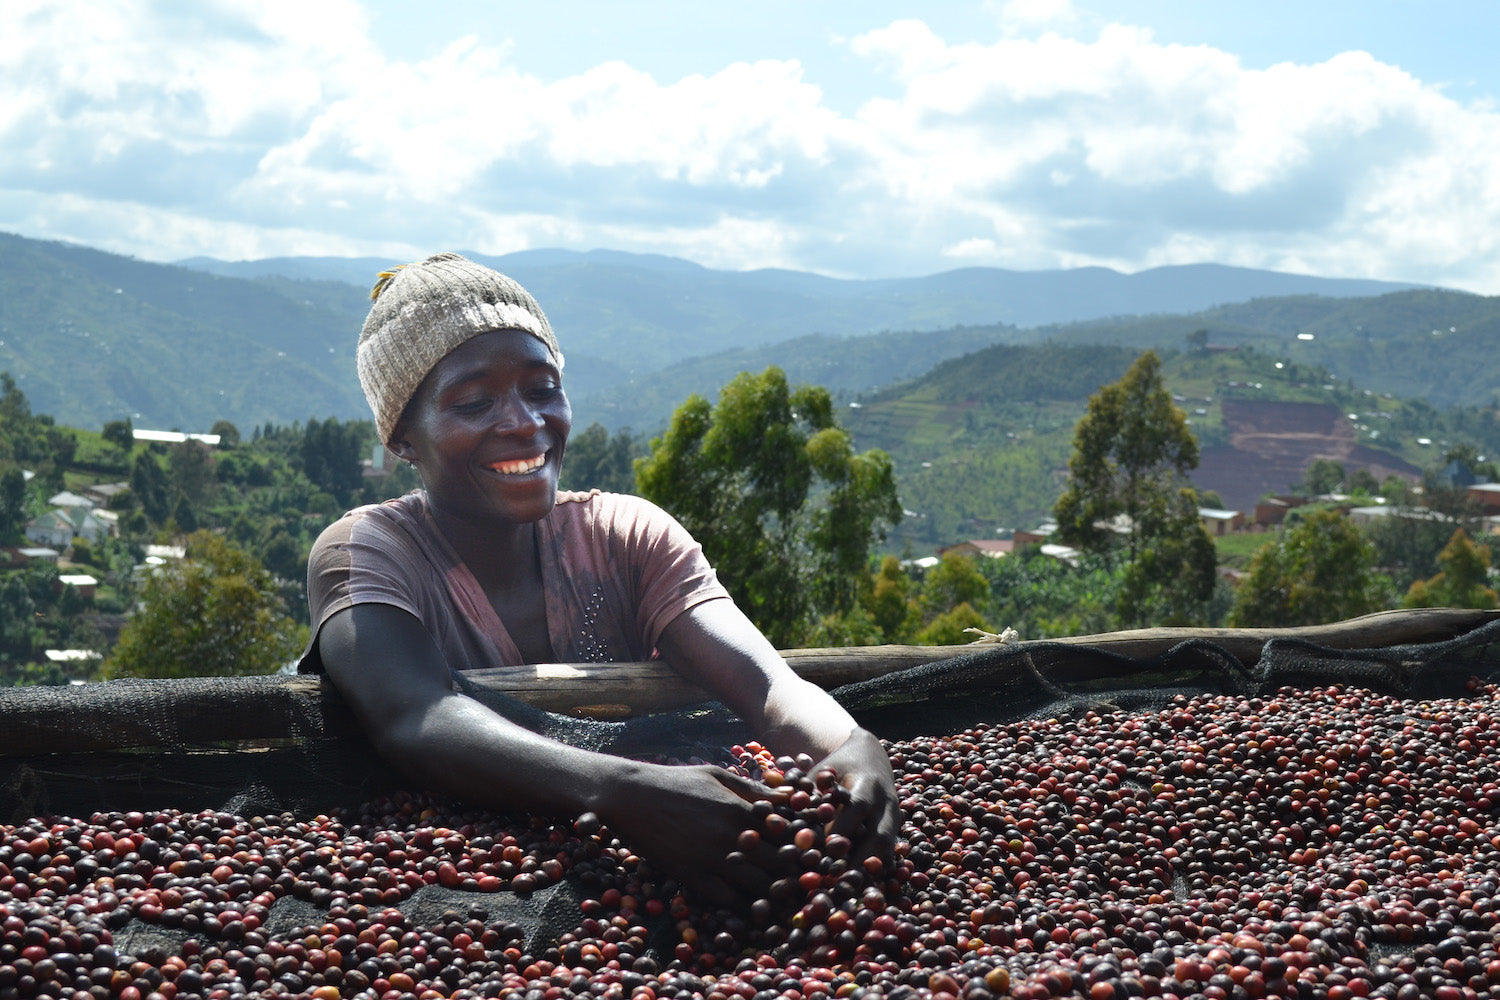 A female employee from the Migoti Coffee Company in Burundi, Africa. She is wearing a brown shirt and khaki beanie and smiling while washing coffee cherries at their washing station in the mountains. In the distance, you can see mountains and the town of Bujumbura. The sky is blue with scattered clouds. 